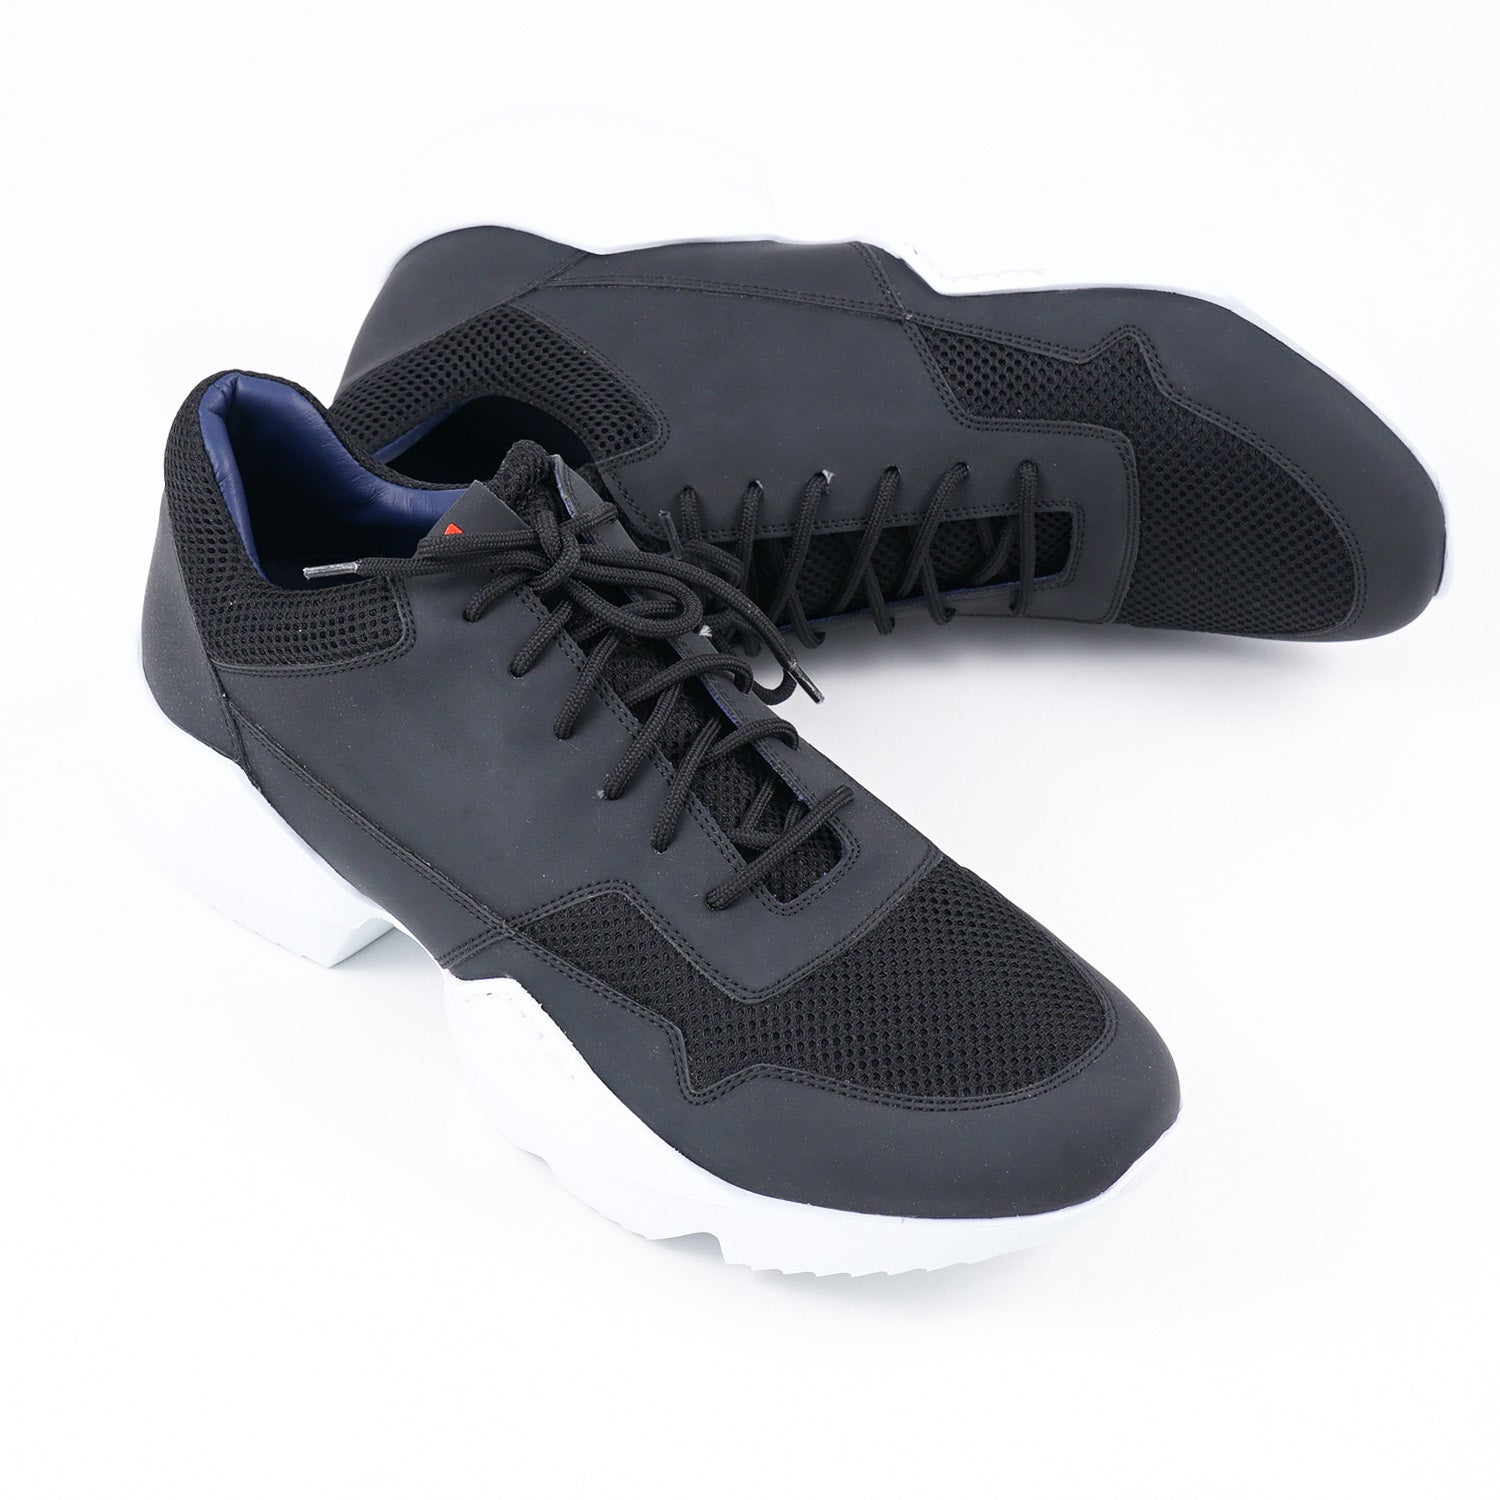 Kiton KNT Leather and Textile Sneakers - Top Shelf Apparel